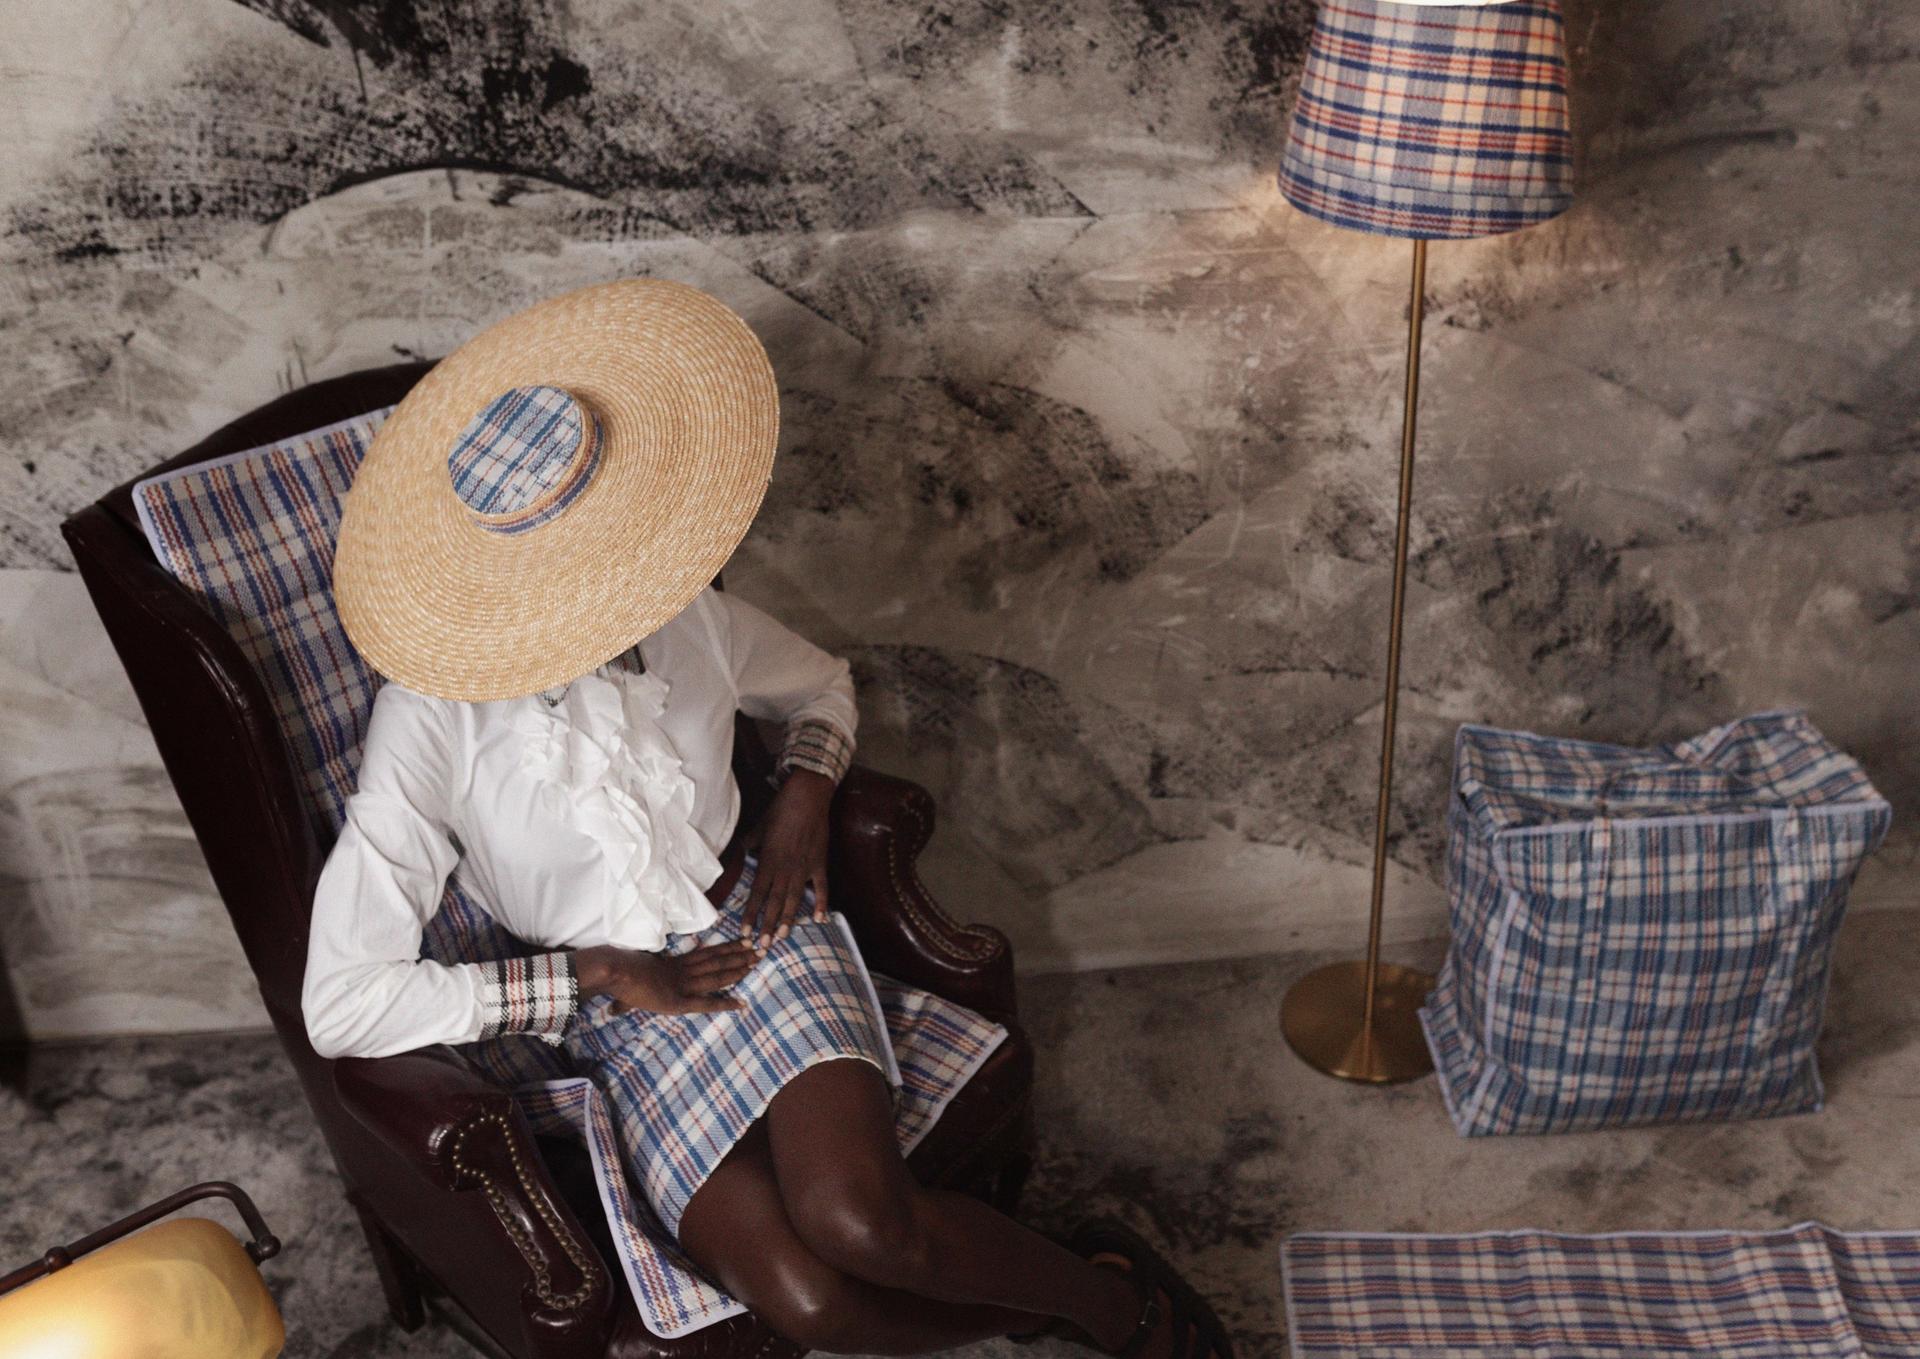 A woman sits wearing a hat, white blouse and plaid plastic skirt with lamp shade of same fabric near plaid travel bag